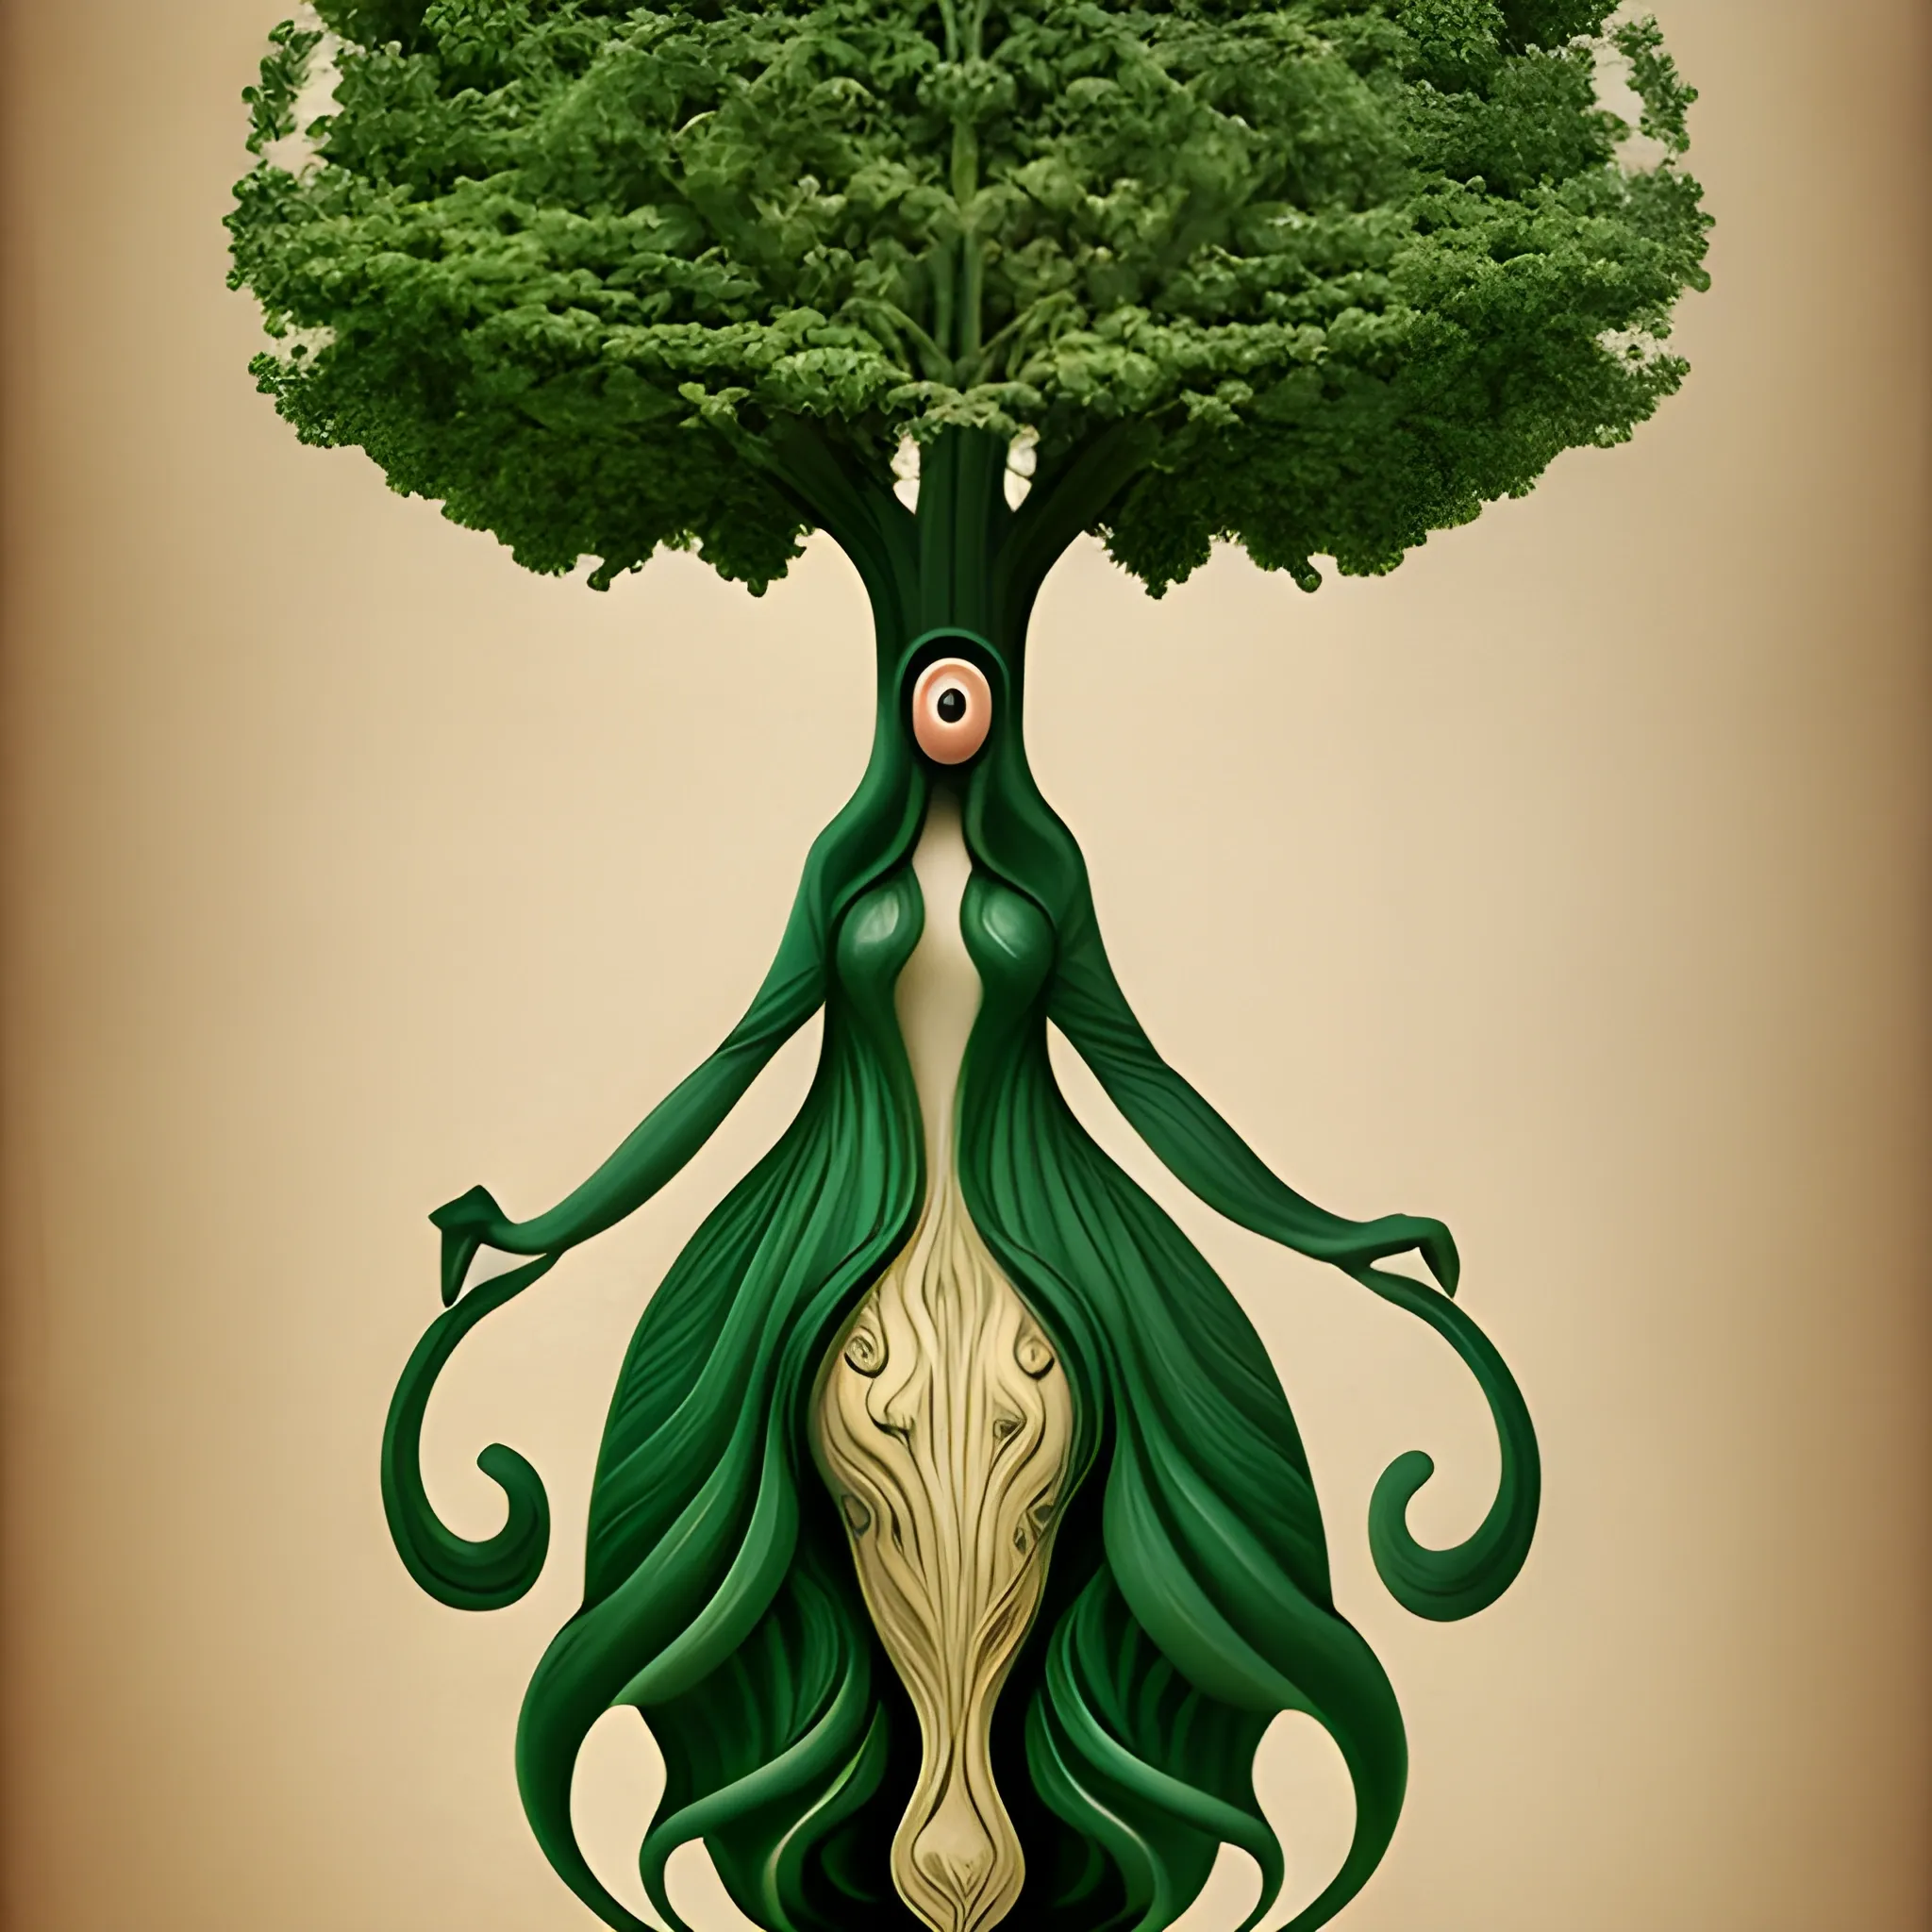 a tree with a real figure of a woman, instead of fruits many mouths, a  surrealism style, and as if it were a color drawing from the 17th century, behance contest winner, great definition,  jardin de las delicias
